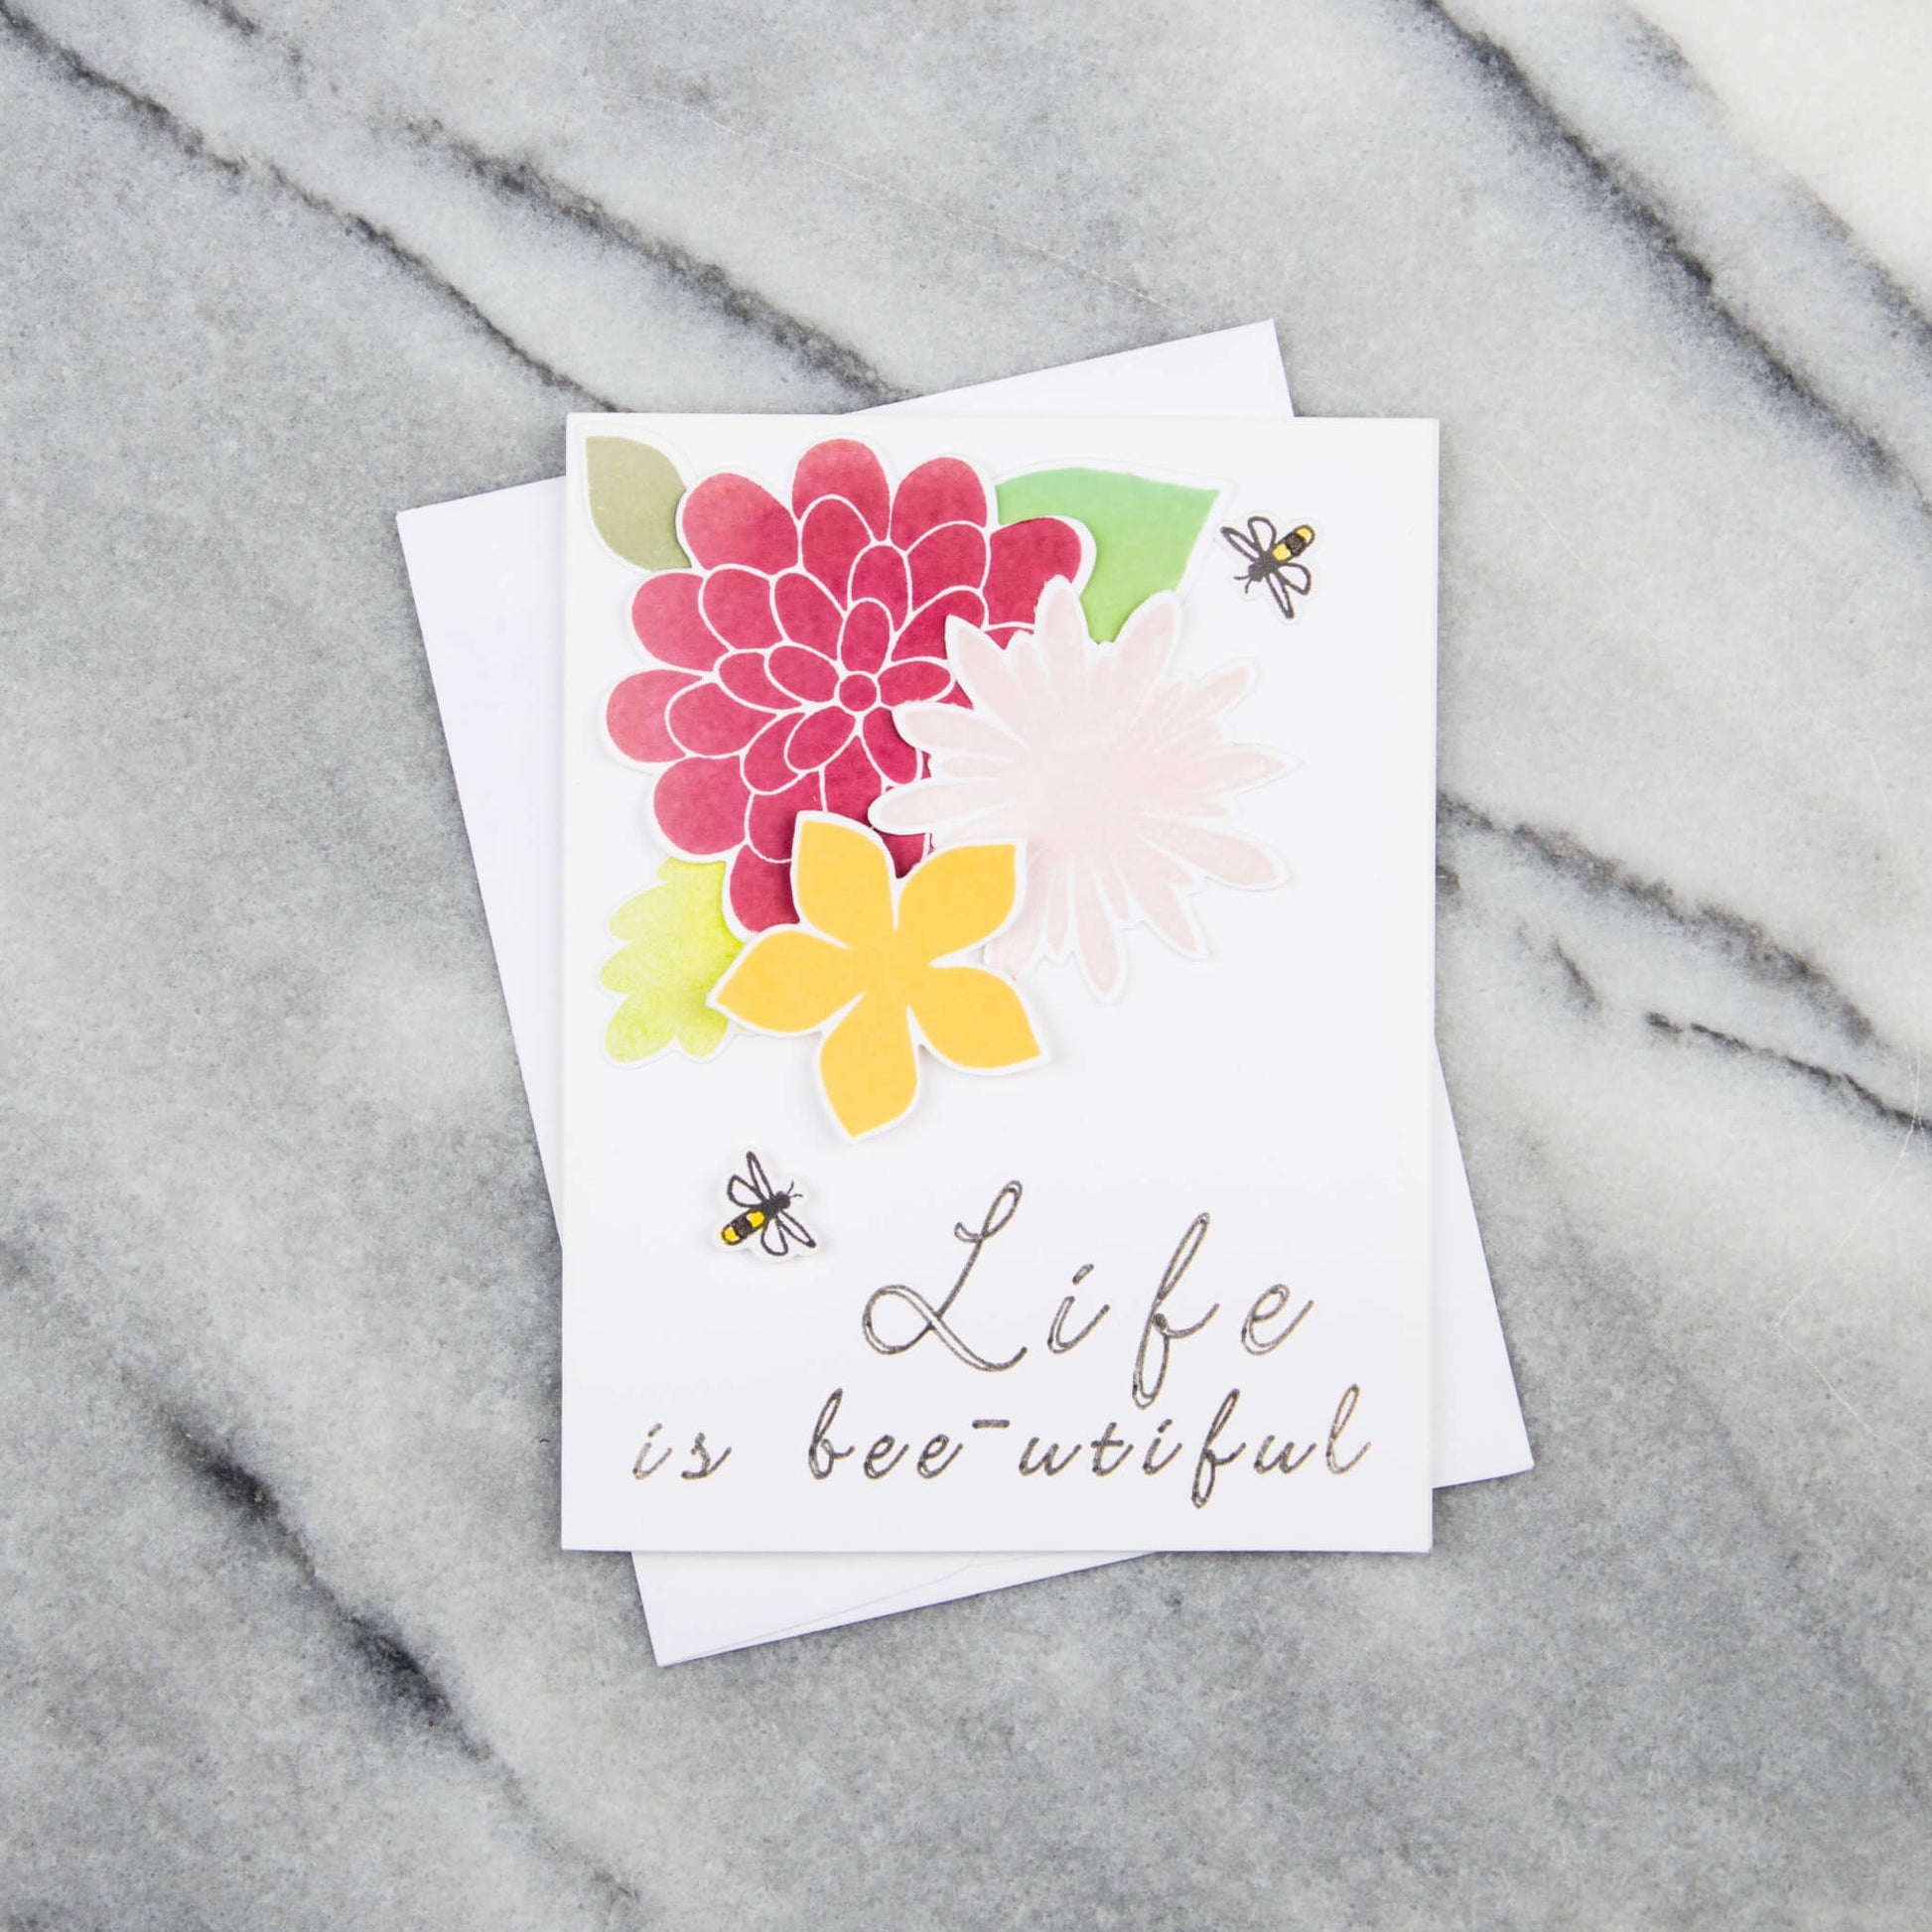 Pop-up greeting card with honeybee, flowers and text that says a life is bee-utiful